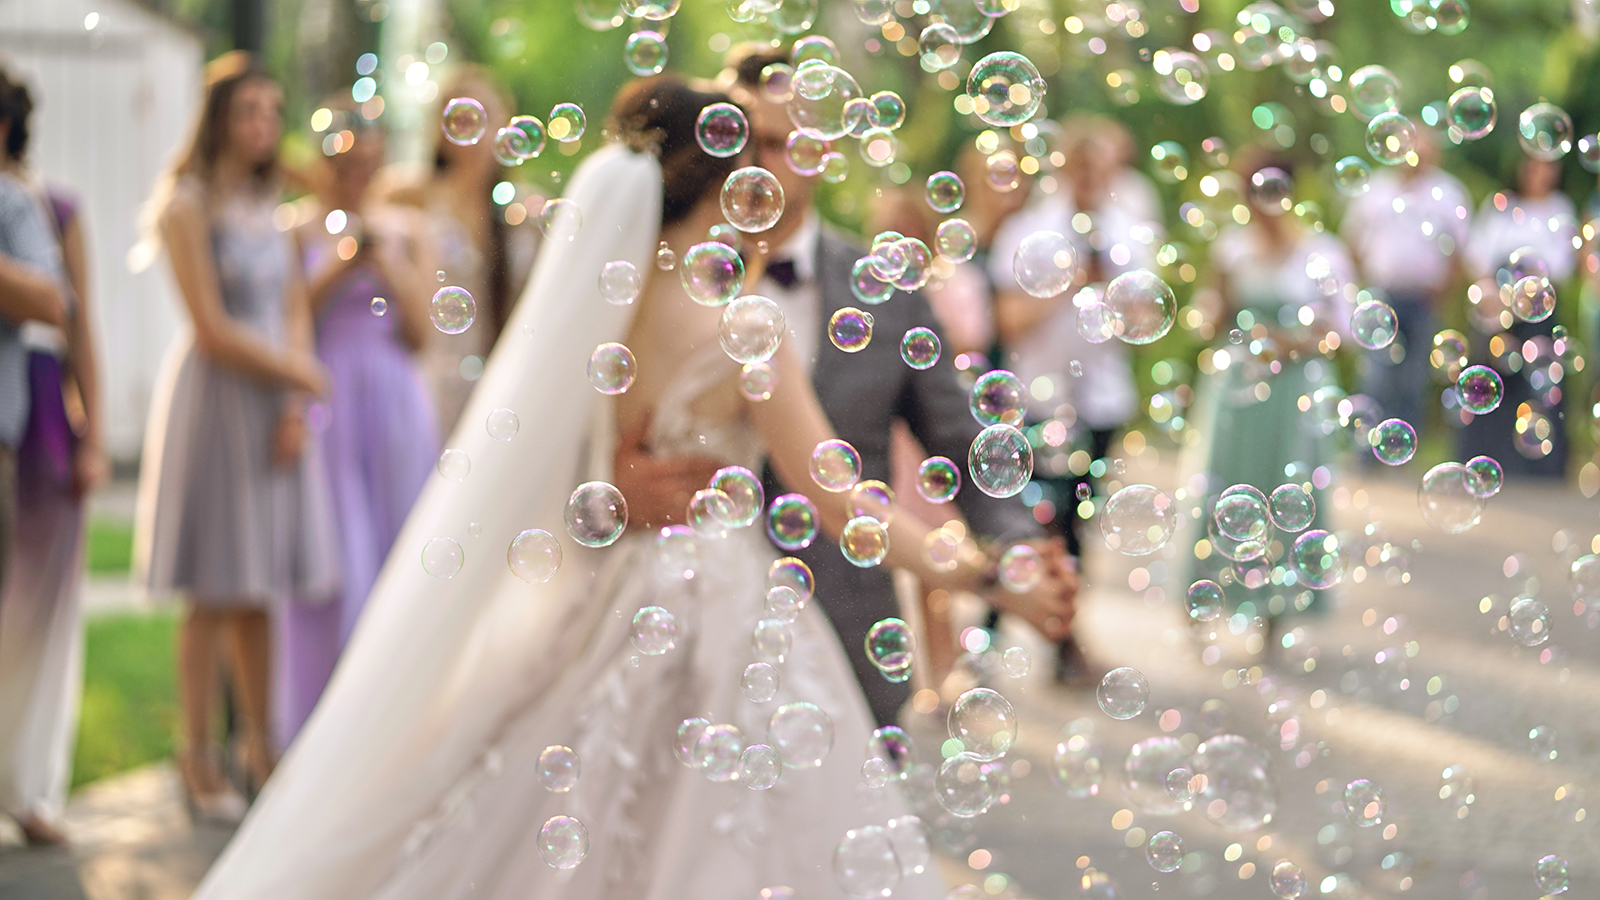 Soap bubbles blurred in the background of the bride